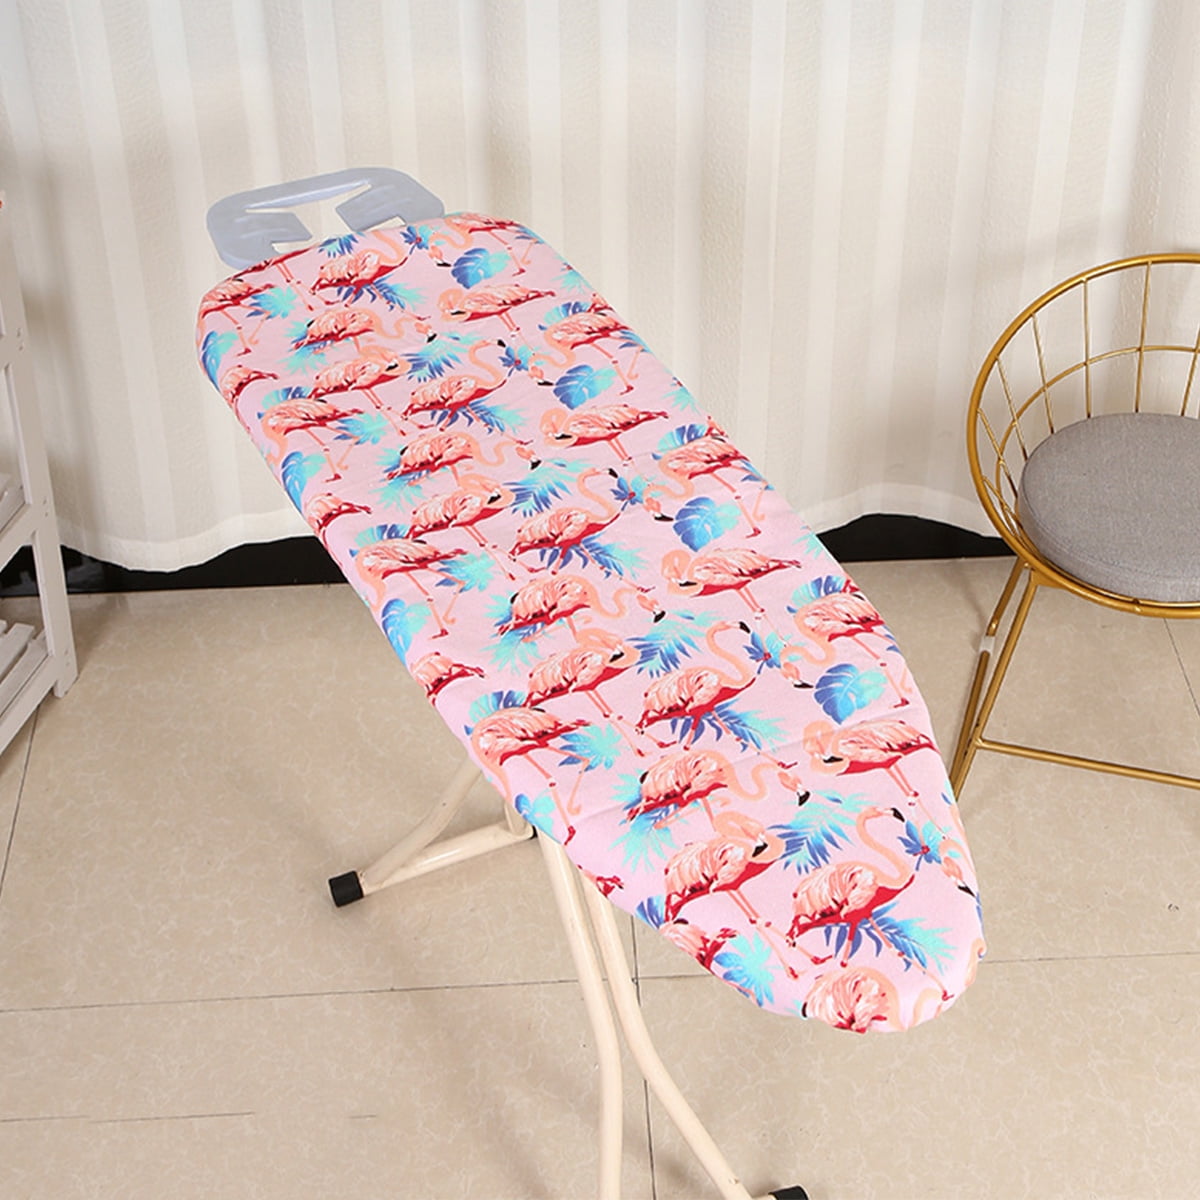 Ironing Board Cover Thick Padding 19 X 50Inch Fits Large and Standard  Boards, Pads Resist Scorching and Staining,Flamingo Printing